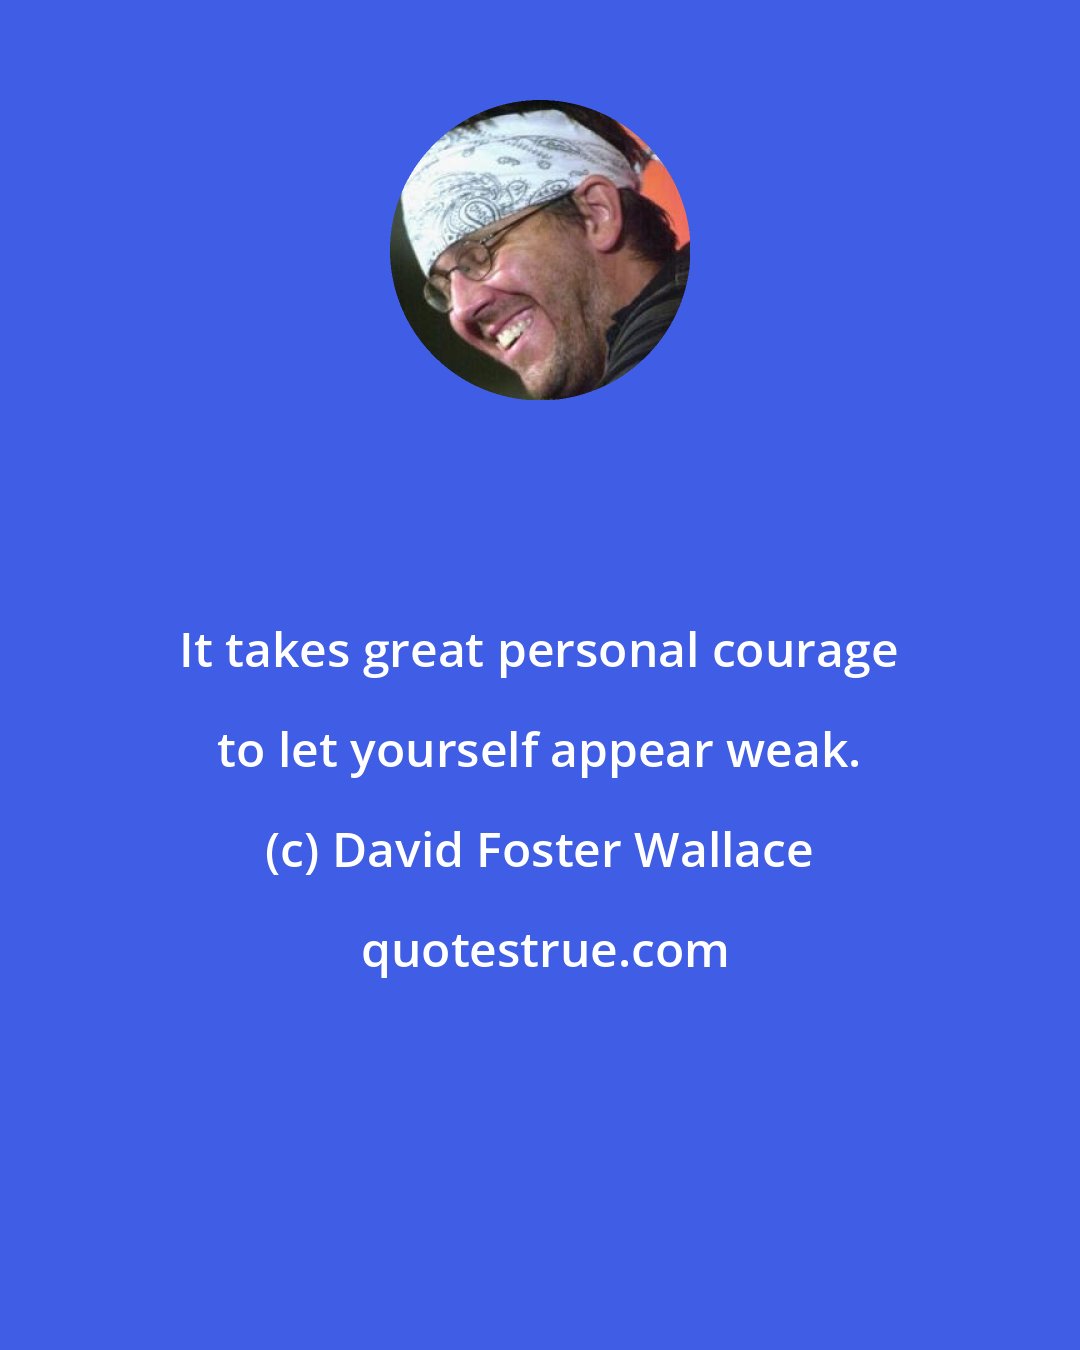 David Foster Wallace: It takes great personal courage to let yourself appear weak.